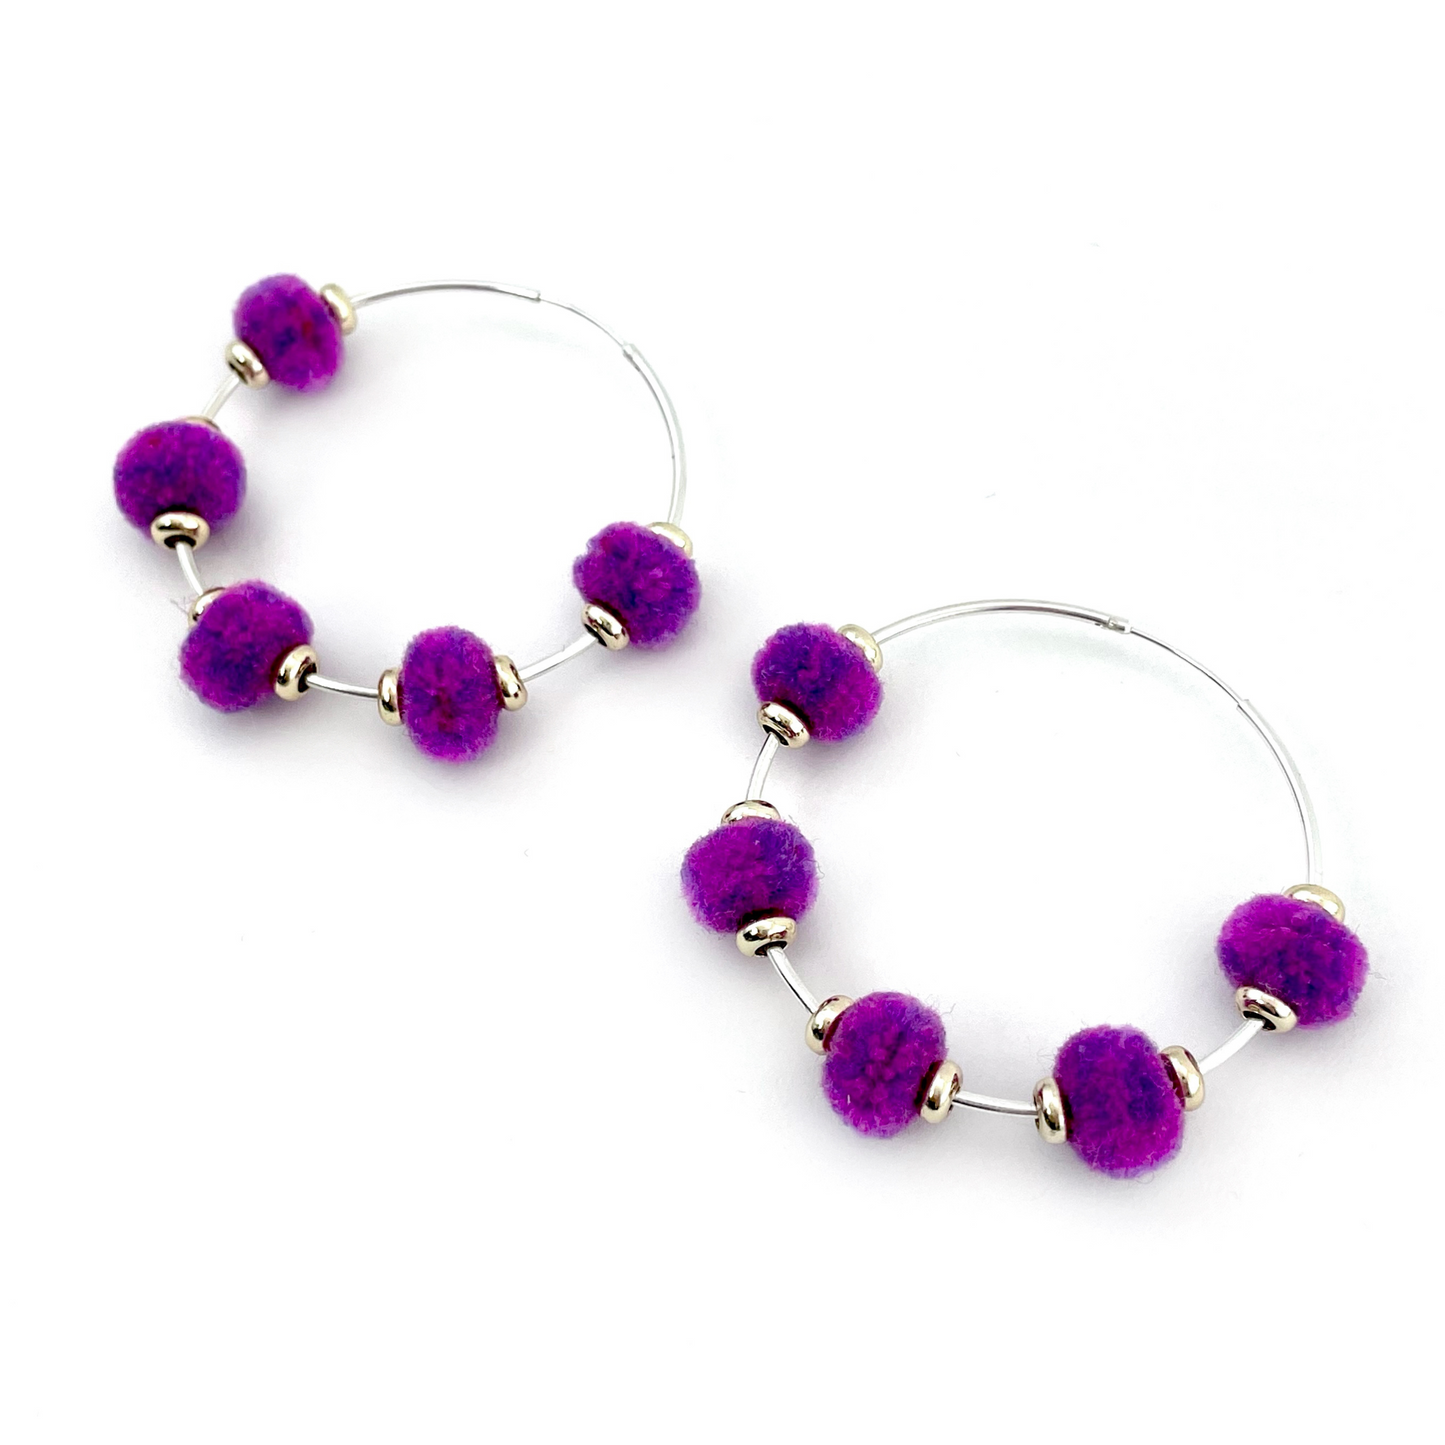 pom'd silver hoops in mauve